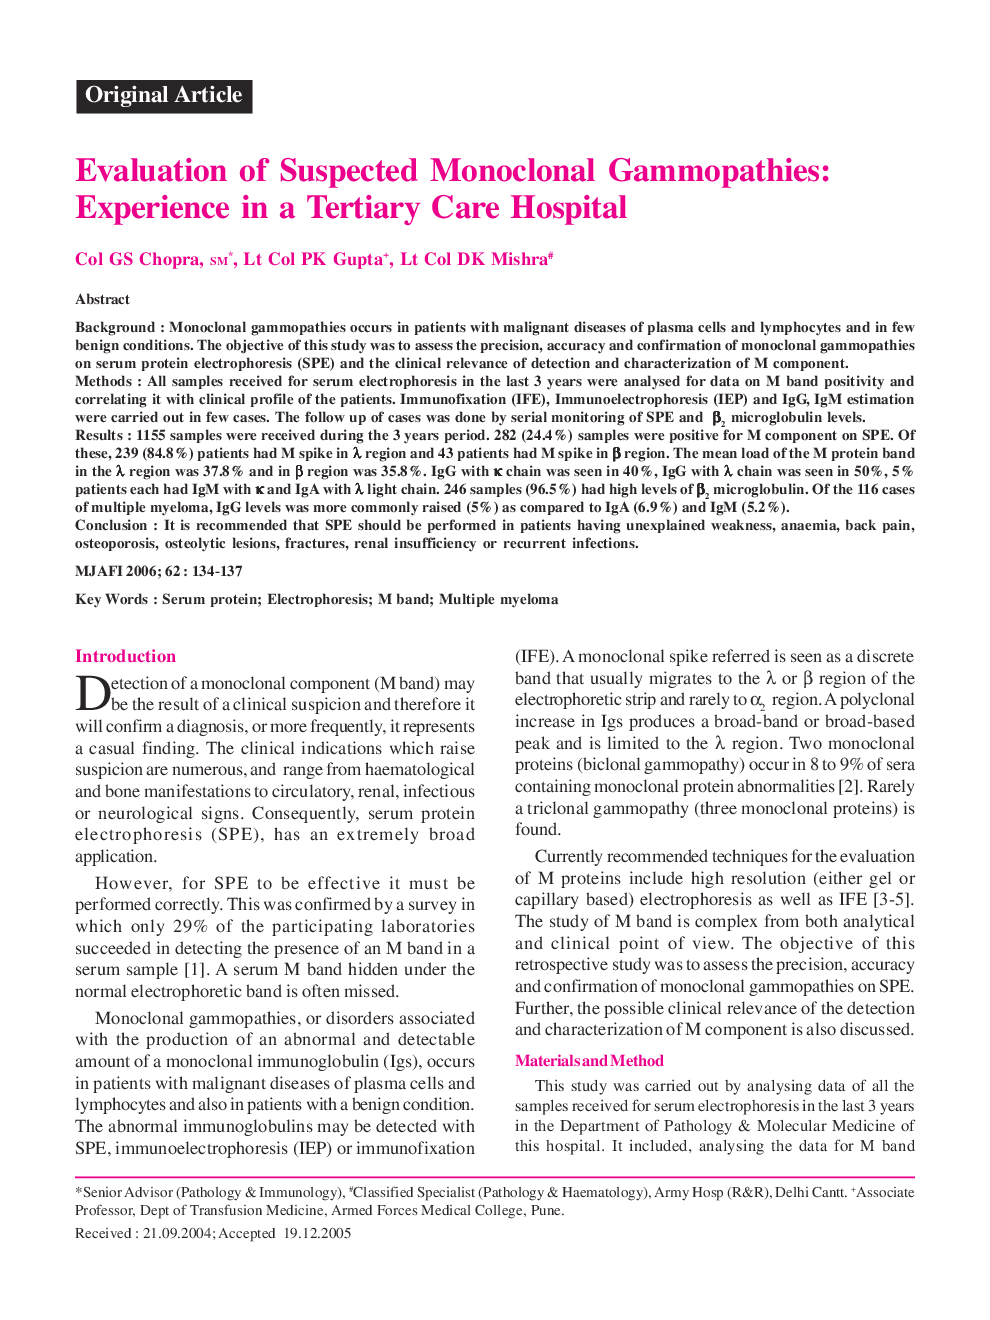 Evaluation of Suspected Monoclonal Gammopathies: Experience in a Tertiary Care Hospital